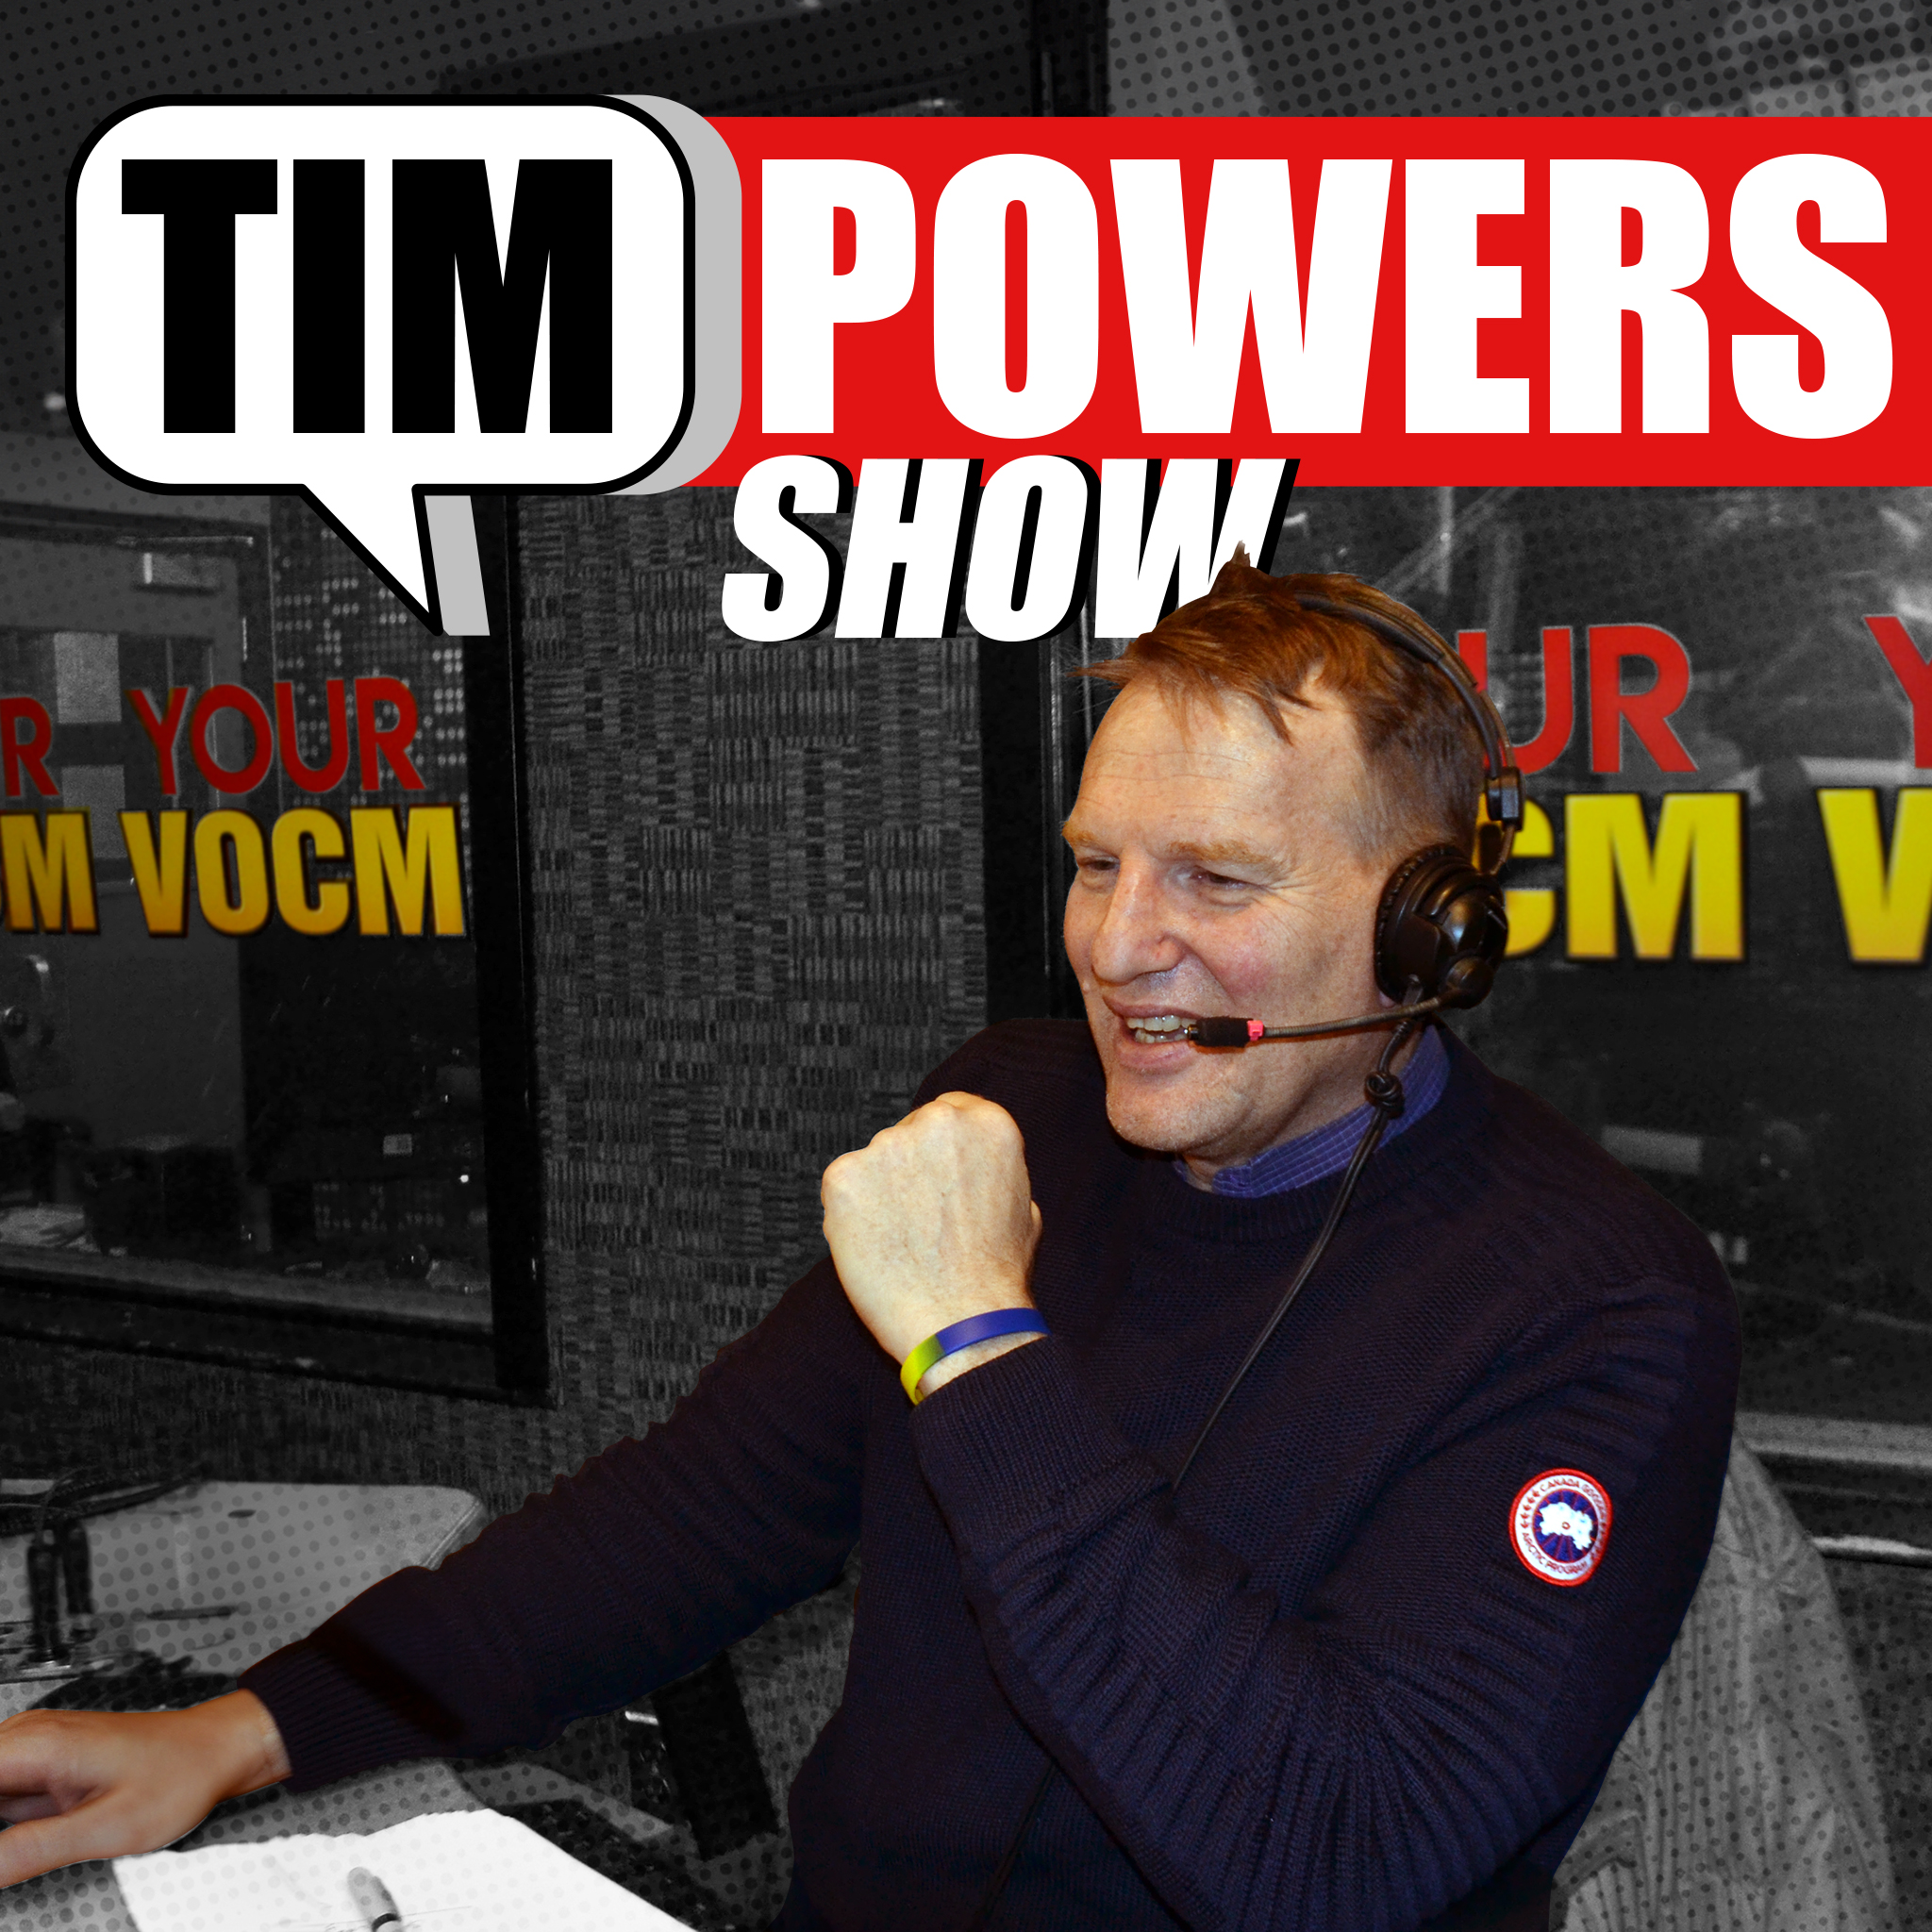 Tim Powers Show, Friday May 10th